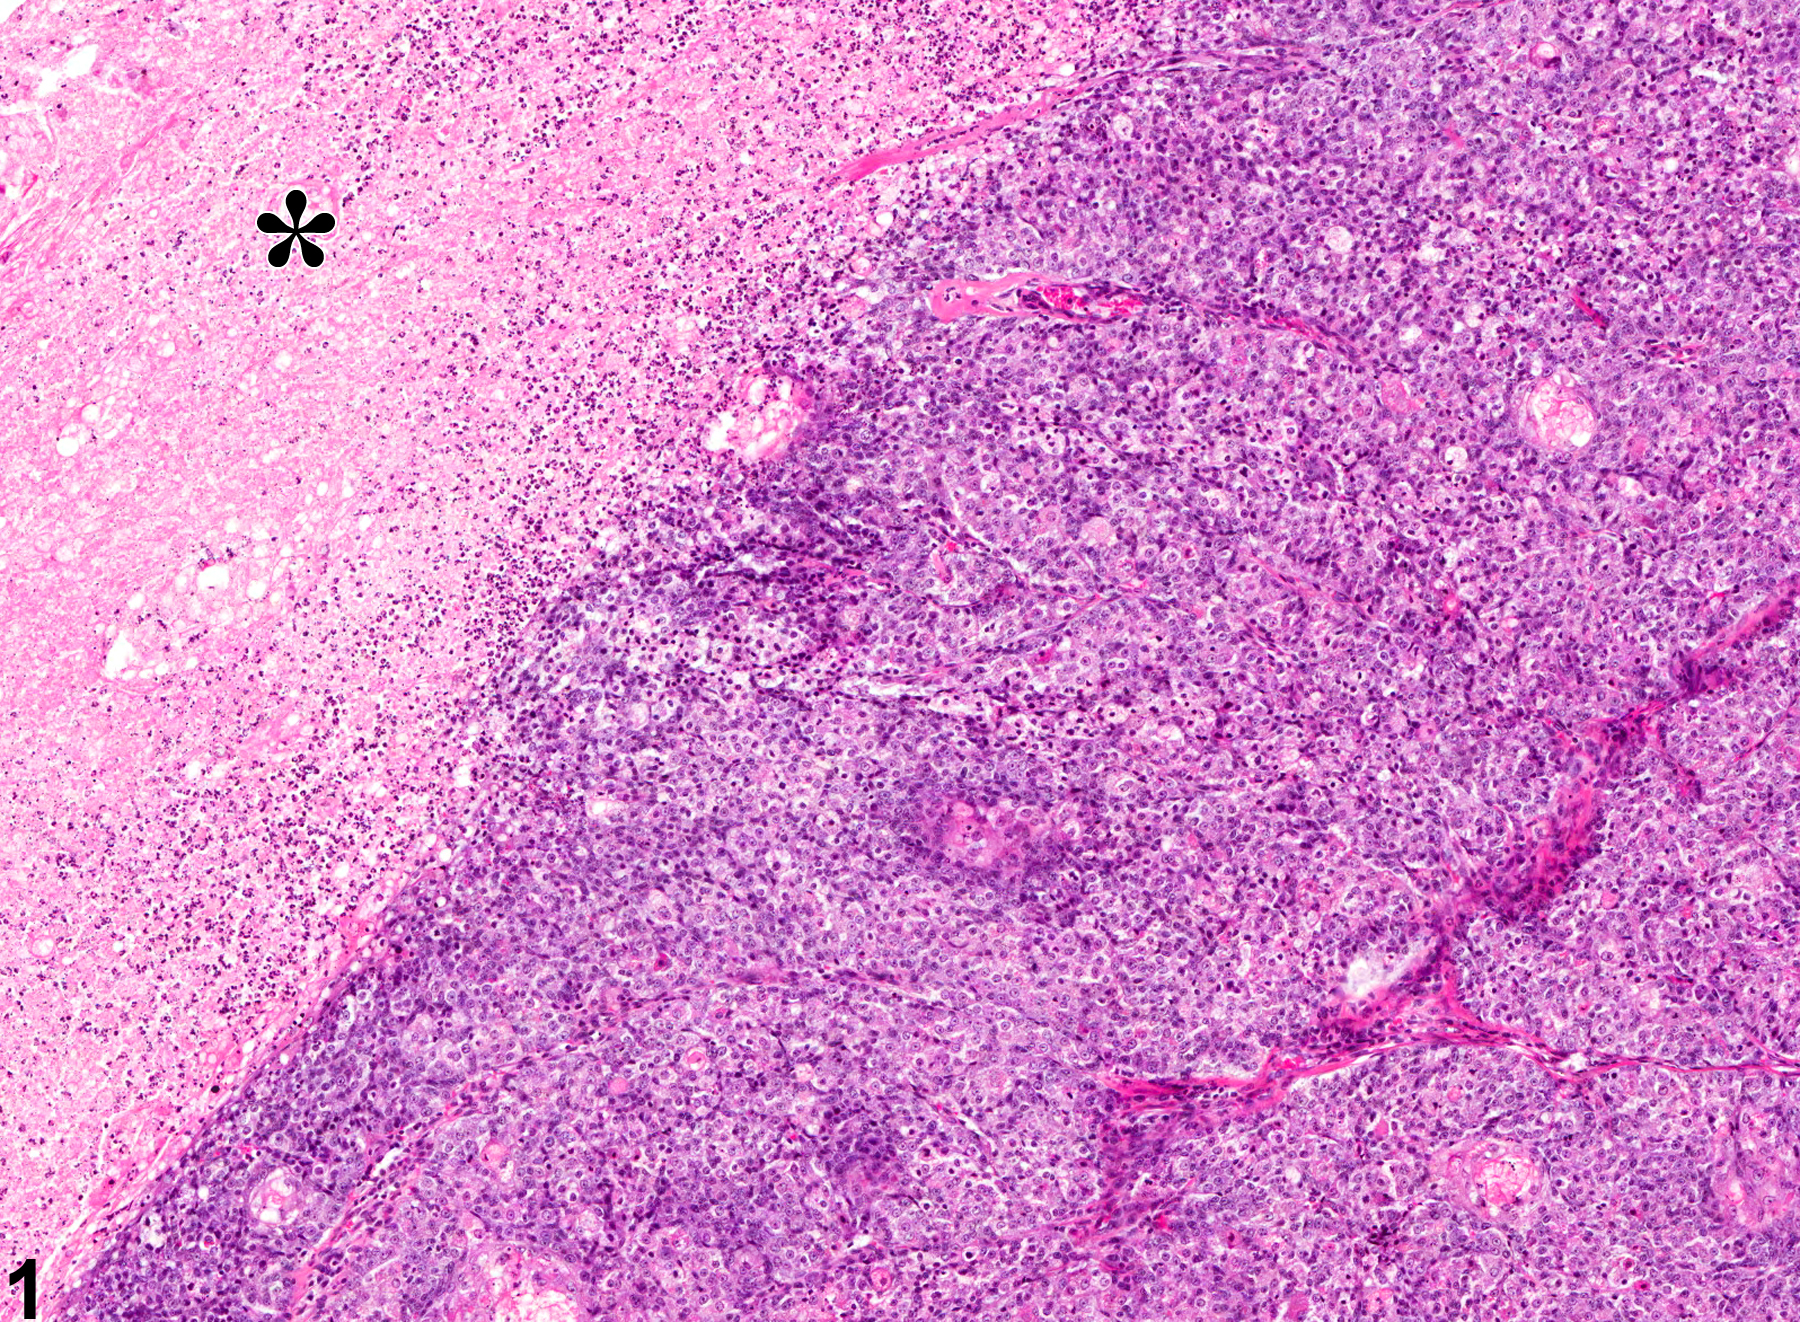 Image of necrosis in the preputial gland from a male F344/N rat in a chronic study